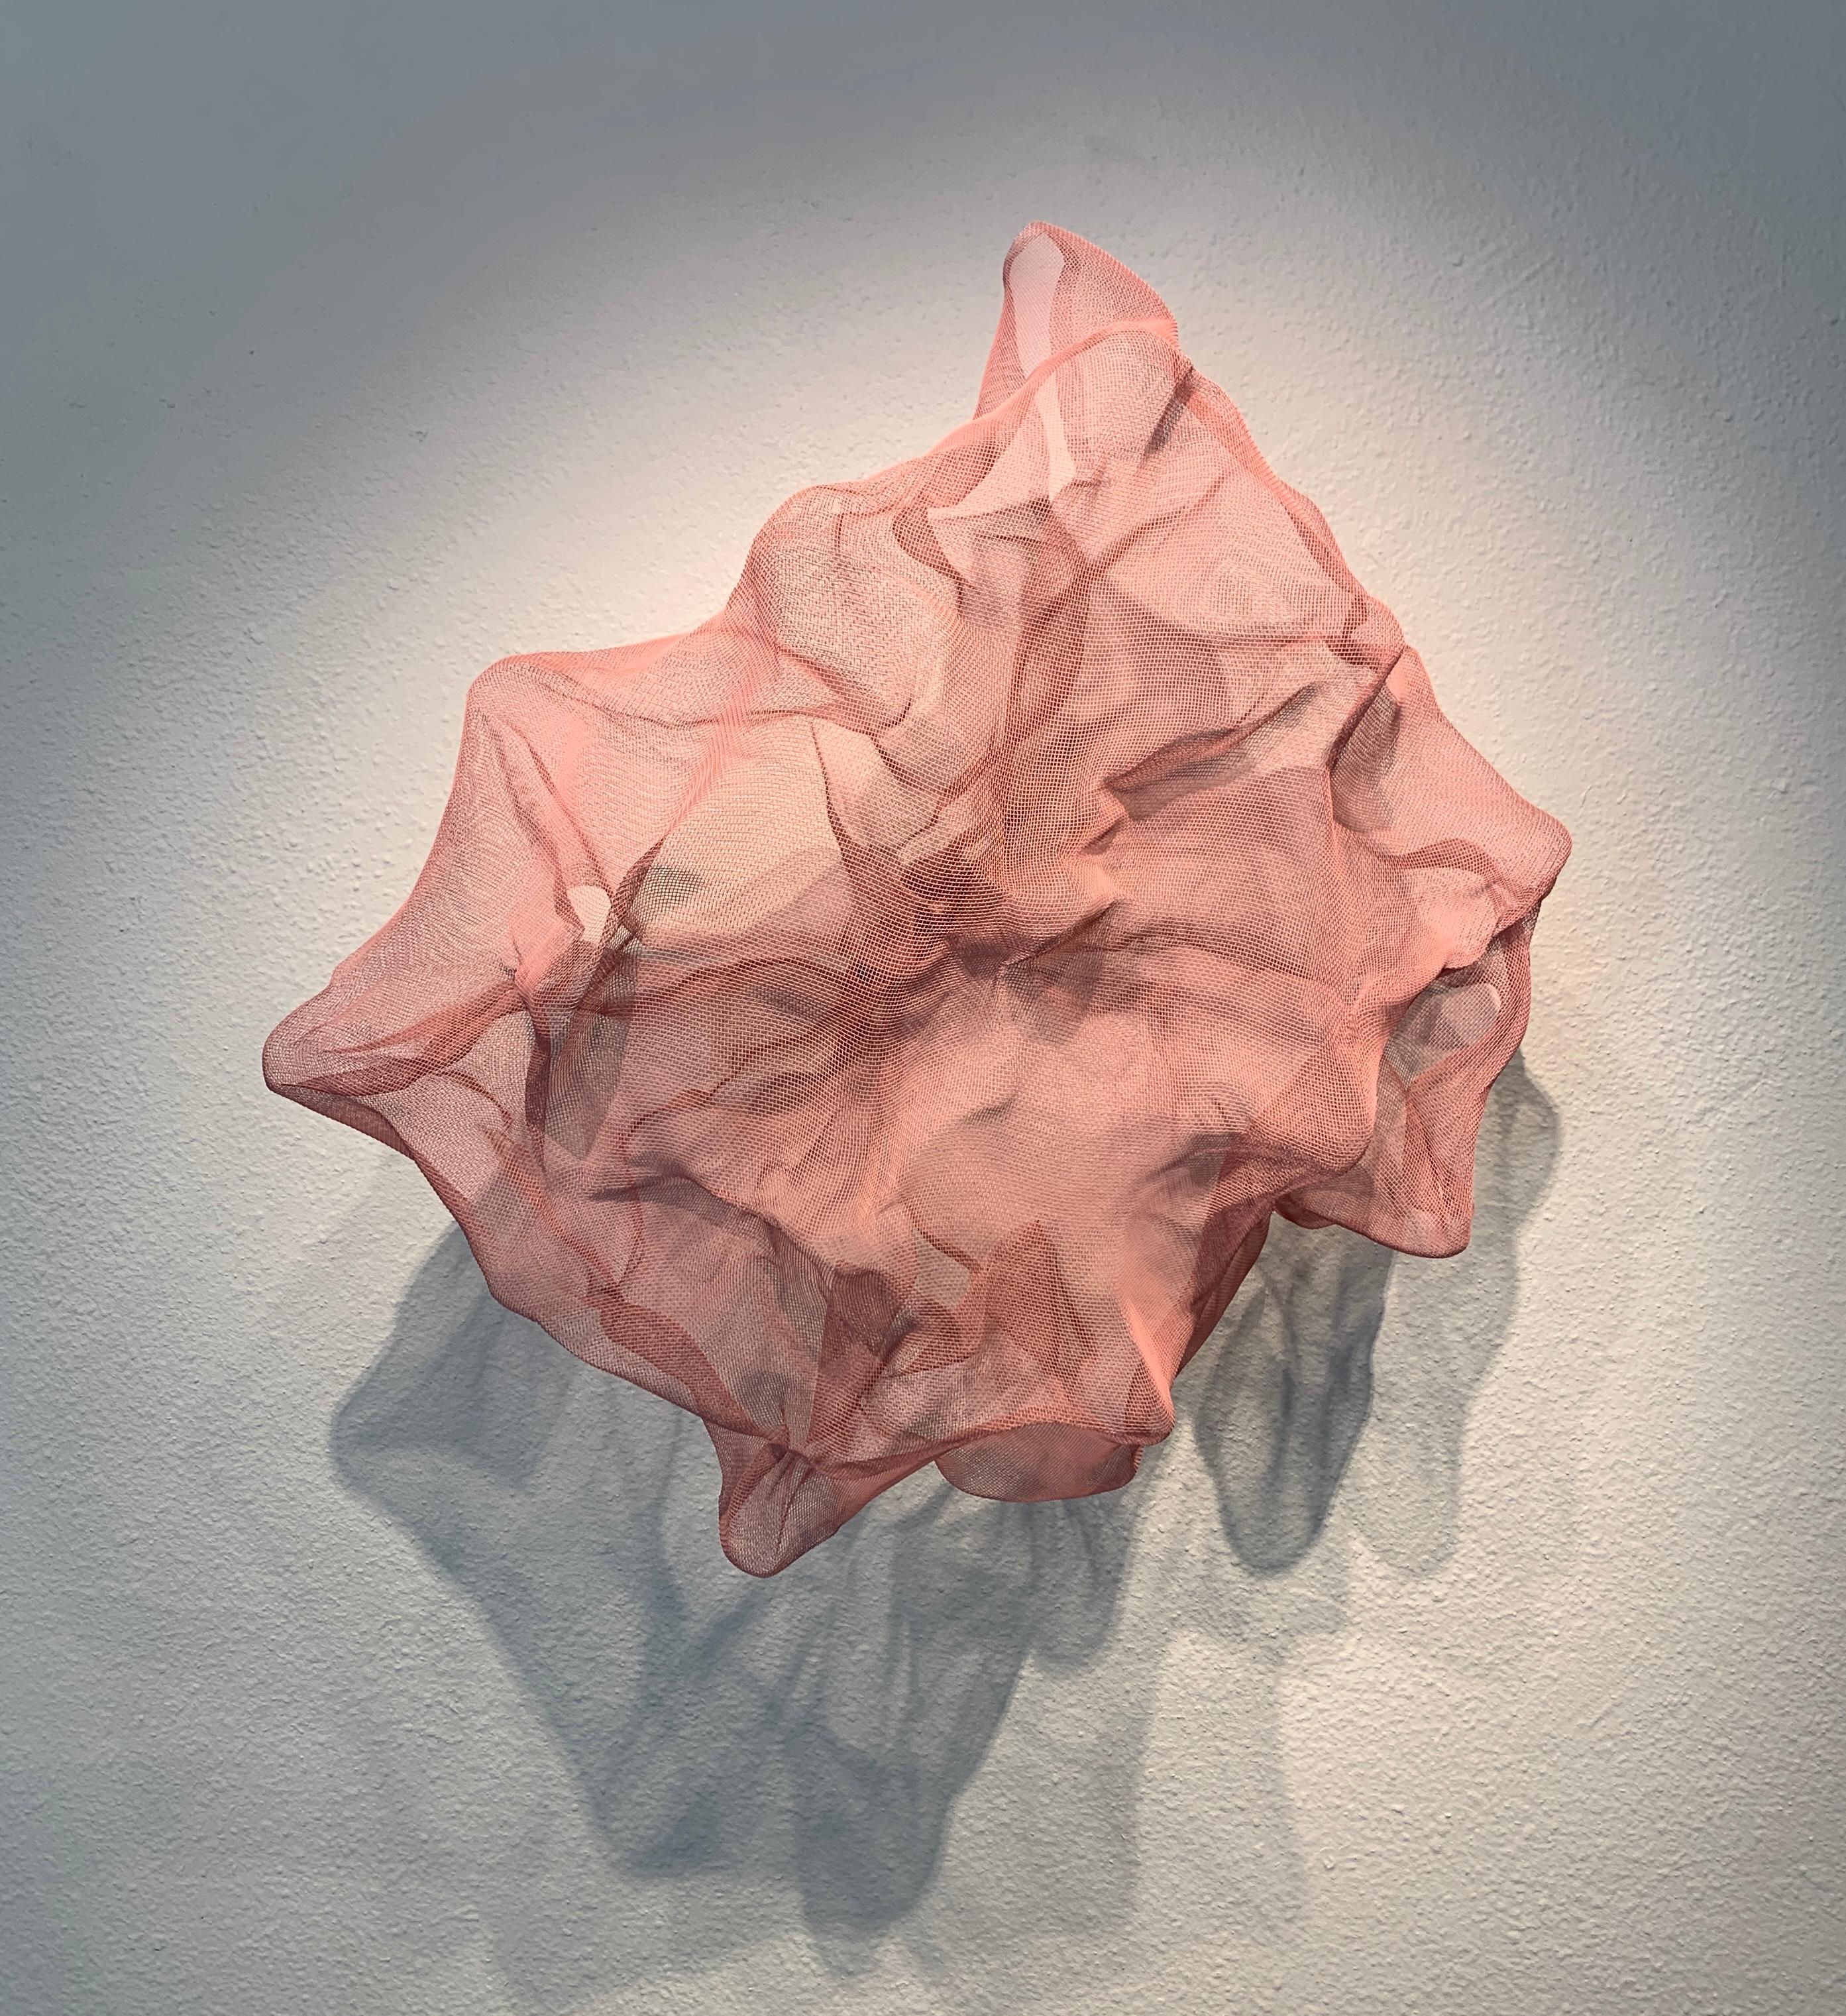 Atticus Adams Cumulus (Candy Pink) Abstract Metal Mesh Wall Sculpture Screen Shadow & Light

This piece can be hung from the ceiling, hung from a wall, or used on a pedestal or table.

Metal fiber sculpture that incorporates fascinating light and